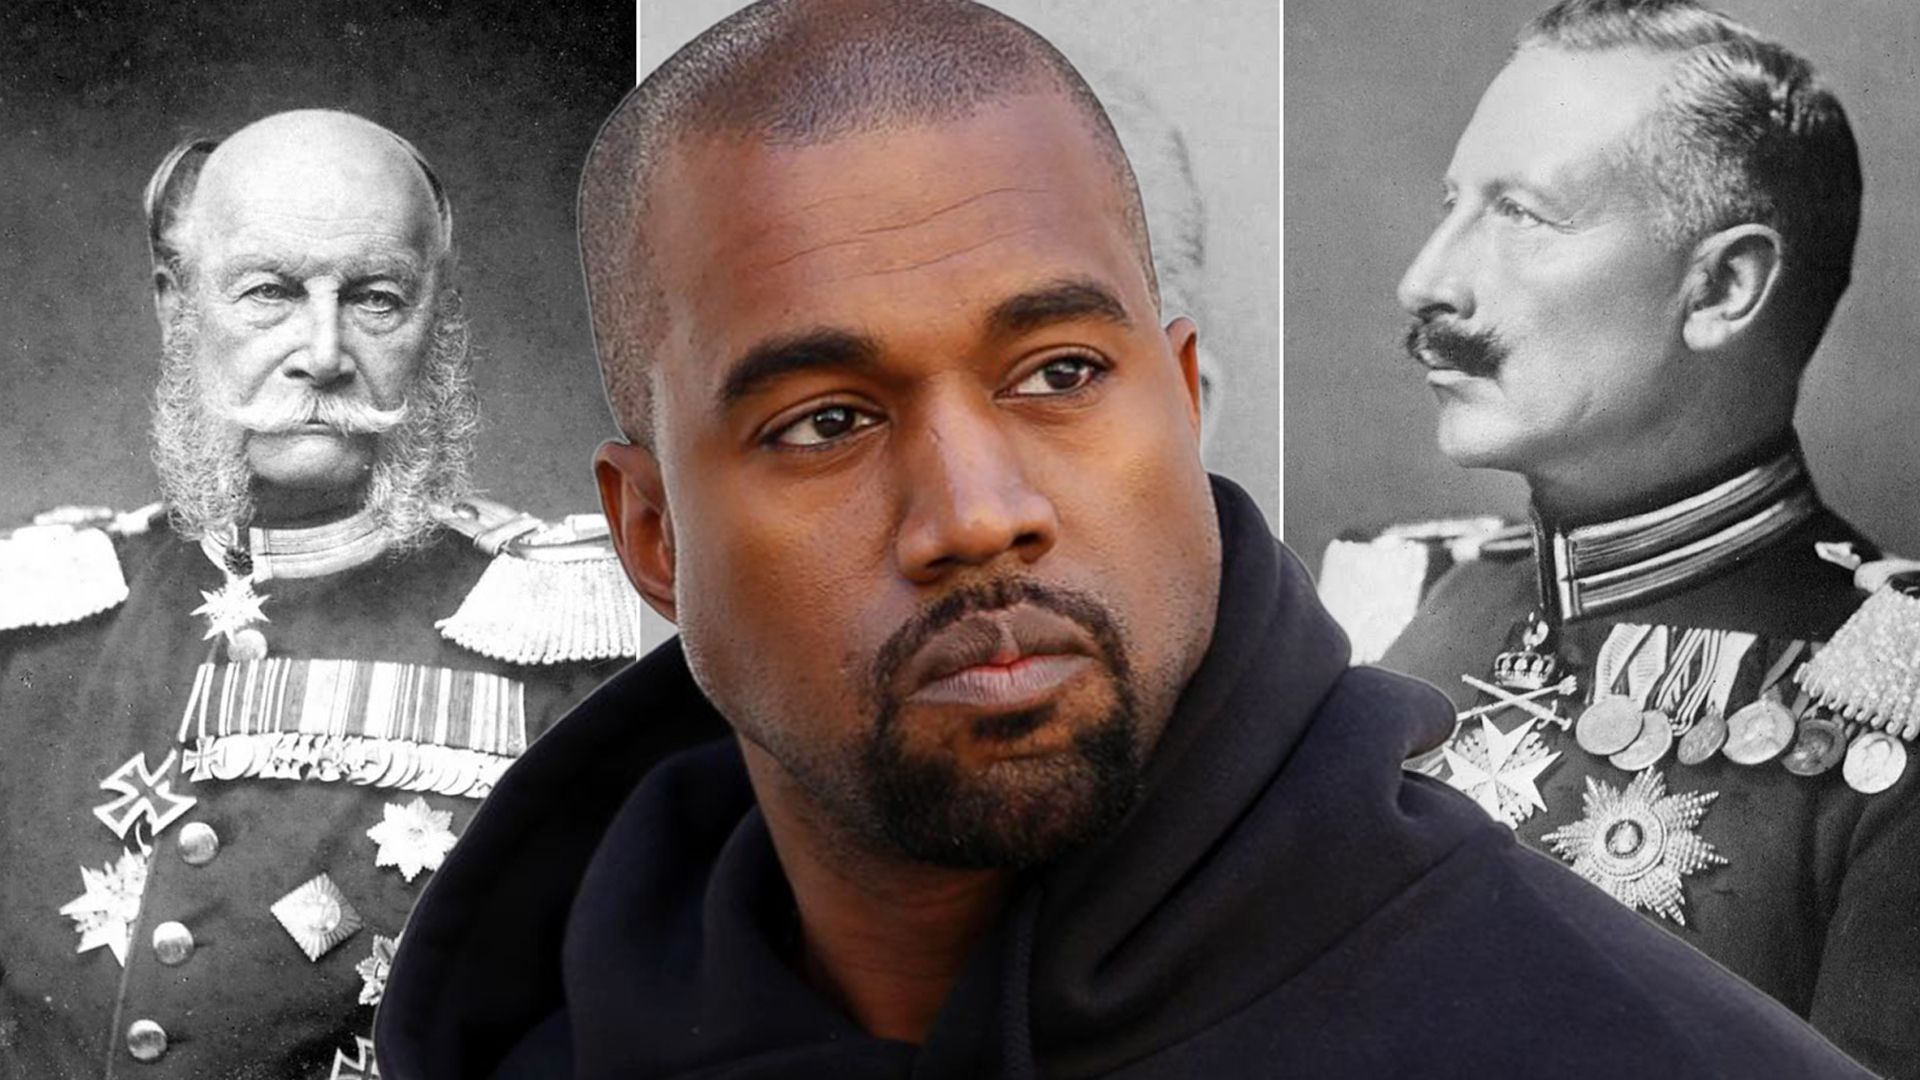 Kanye "Ye" West Claims To Be Rightful Emperor Of Germany